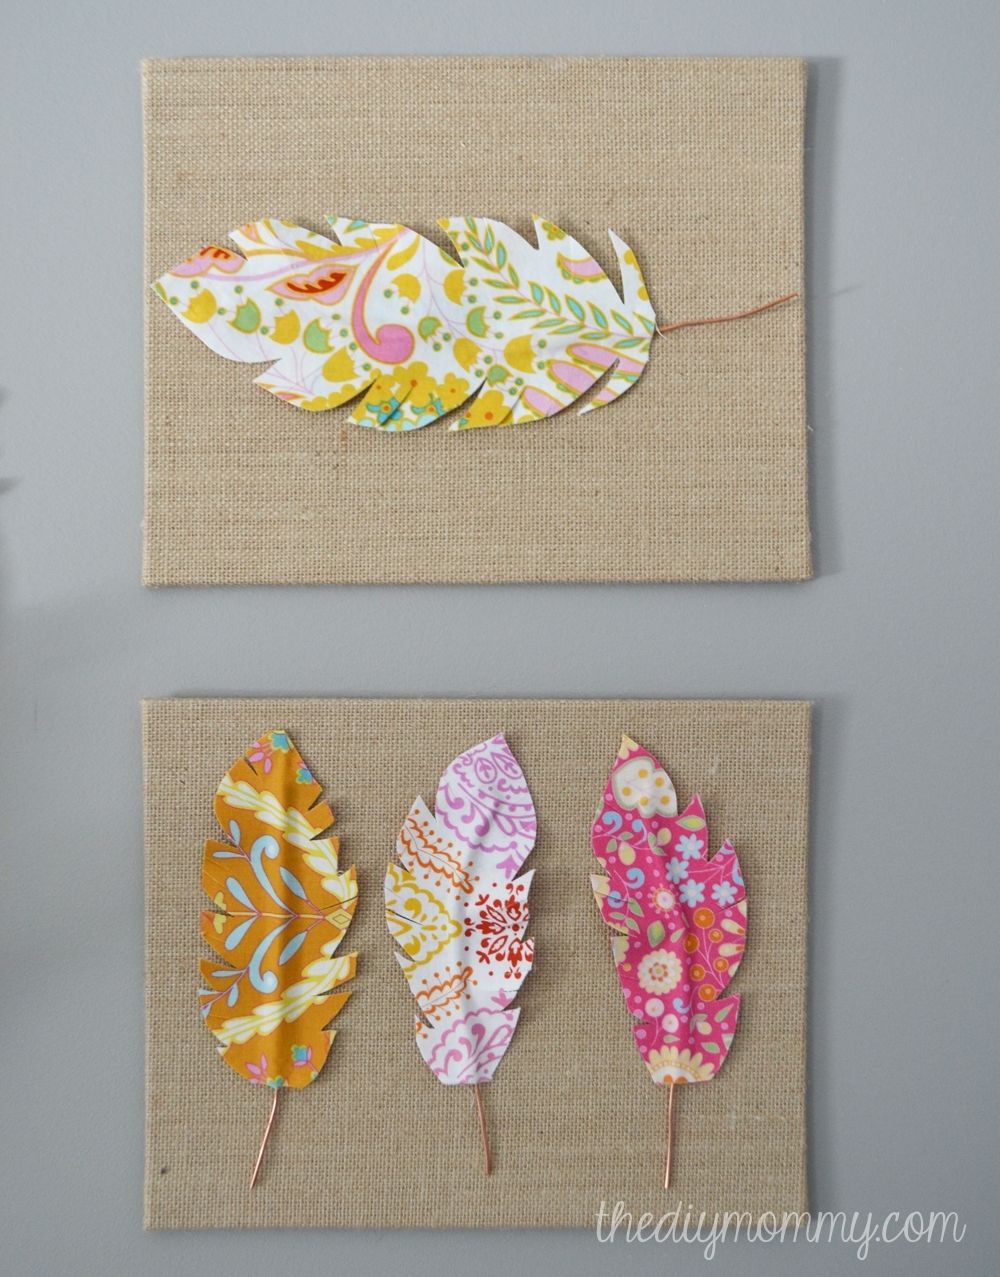 Make Fabric Feather Wall Art | The Diy Mommy Pertaining To Current Diy Textile Wall Art (View 3 of 15)